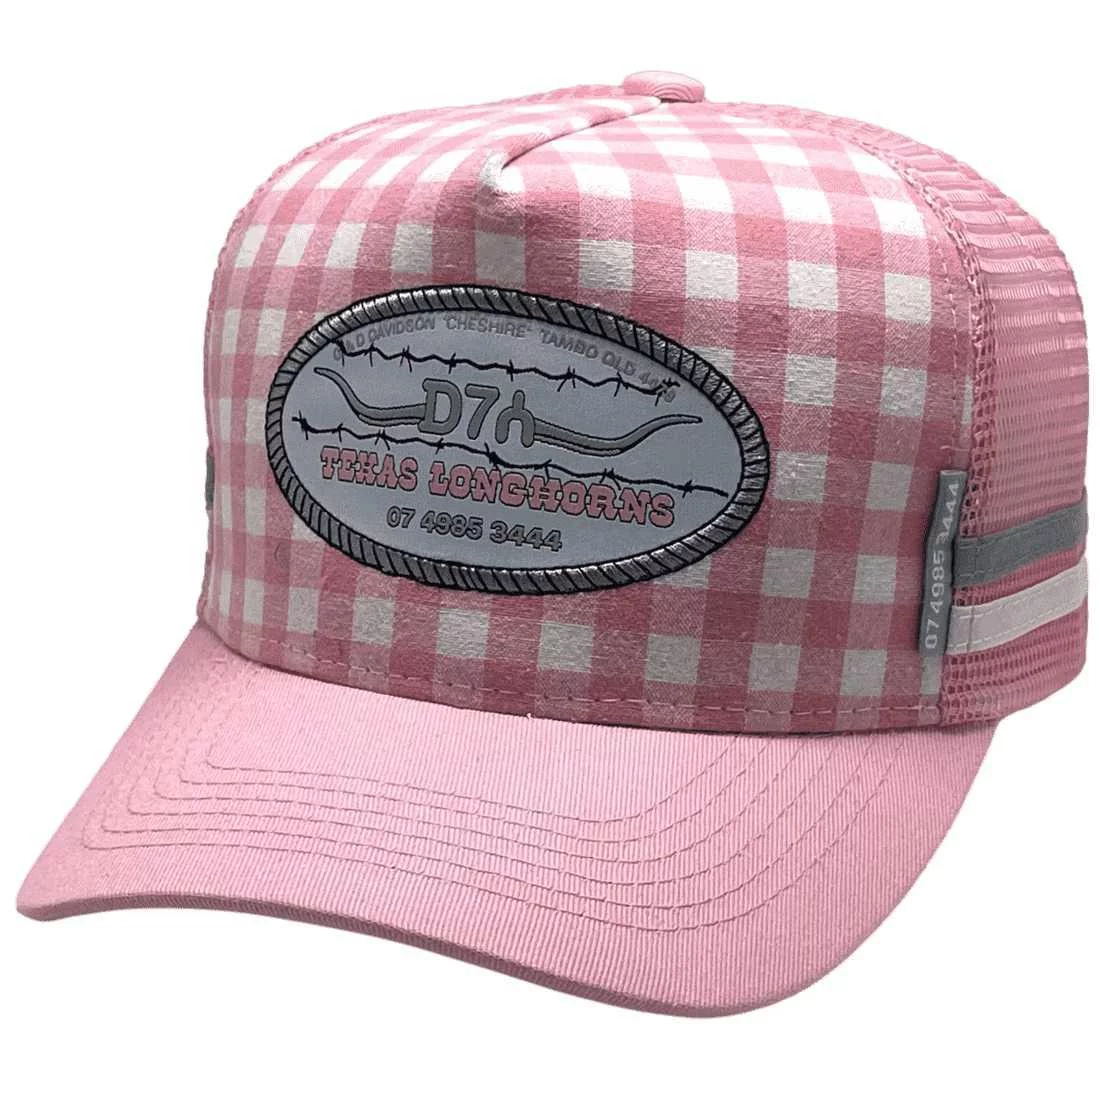 Texas Longhorns Tambo D7 Spur HP - Midrange Aussie Trucker Hats with Double Side Bands -Gingham Cotton Pink White